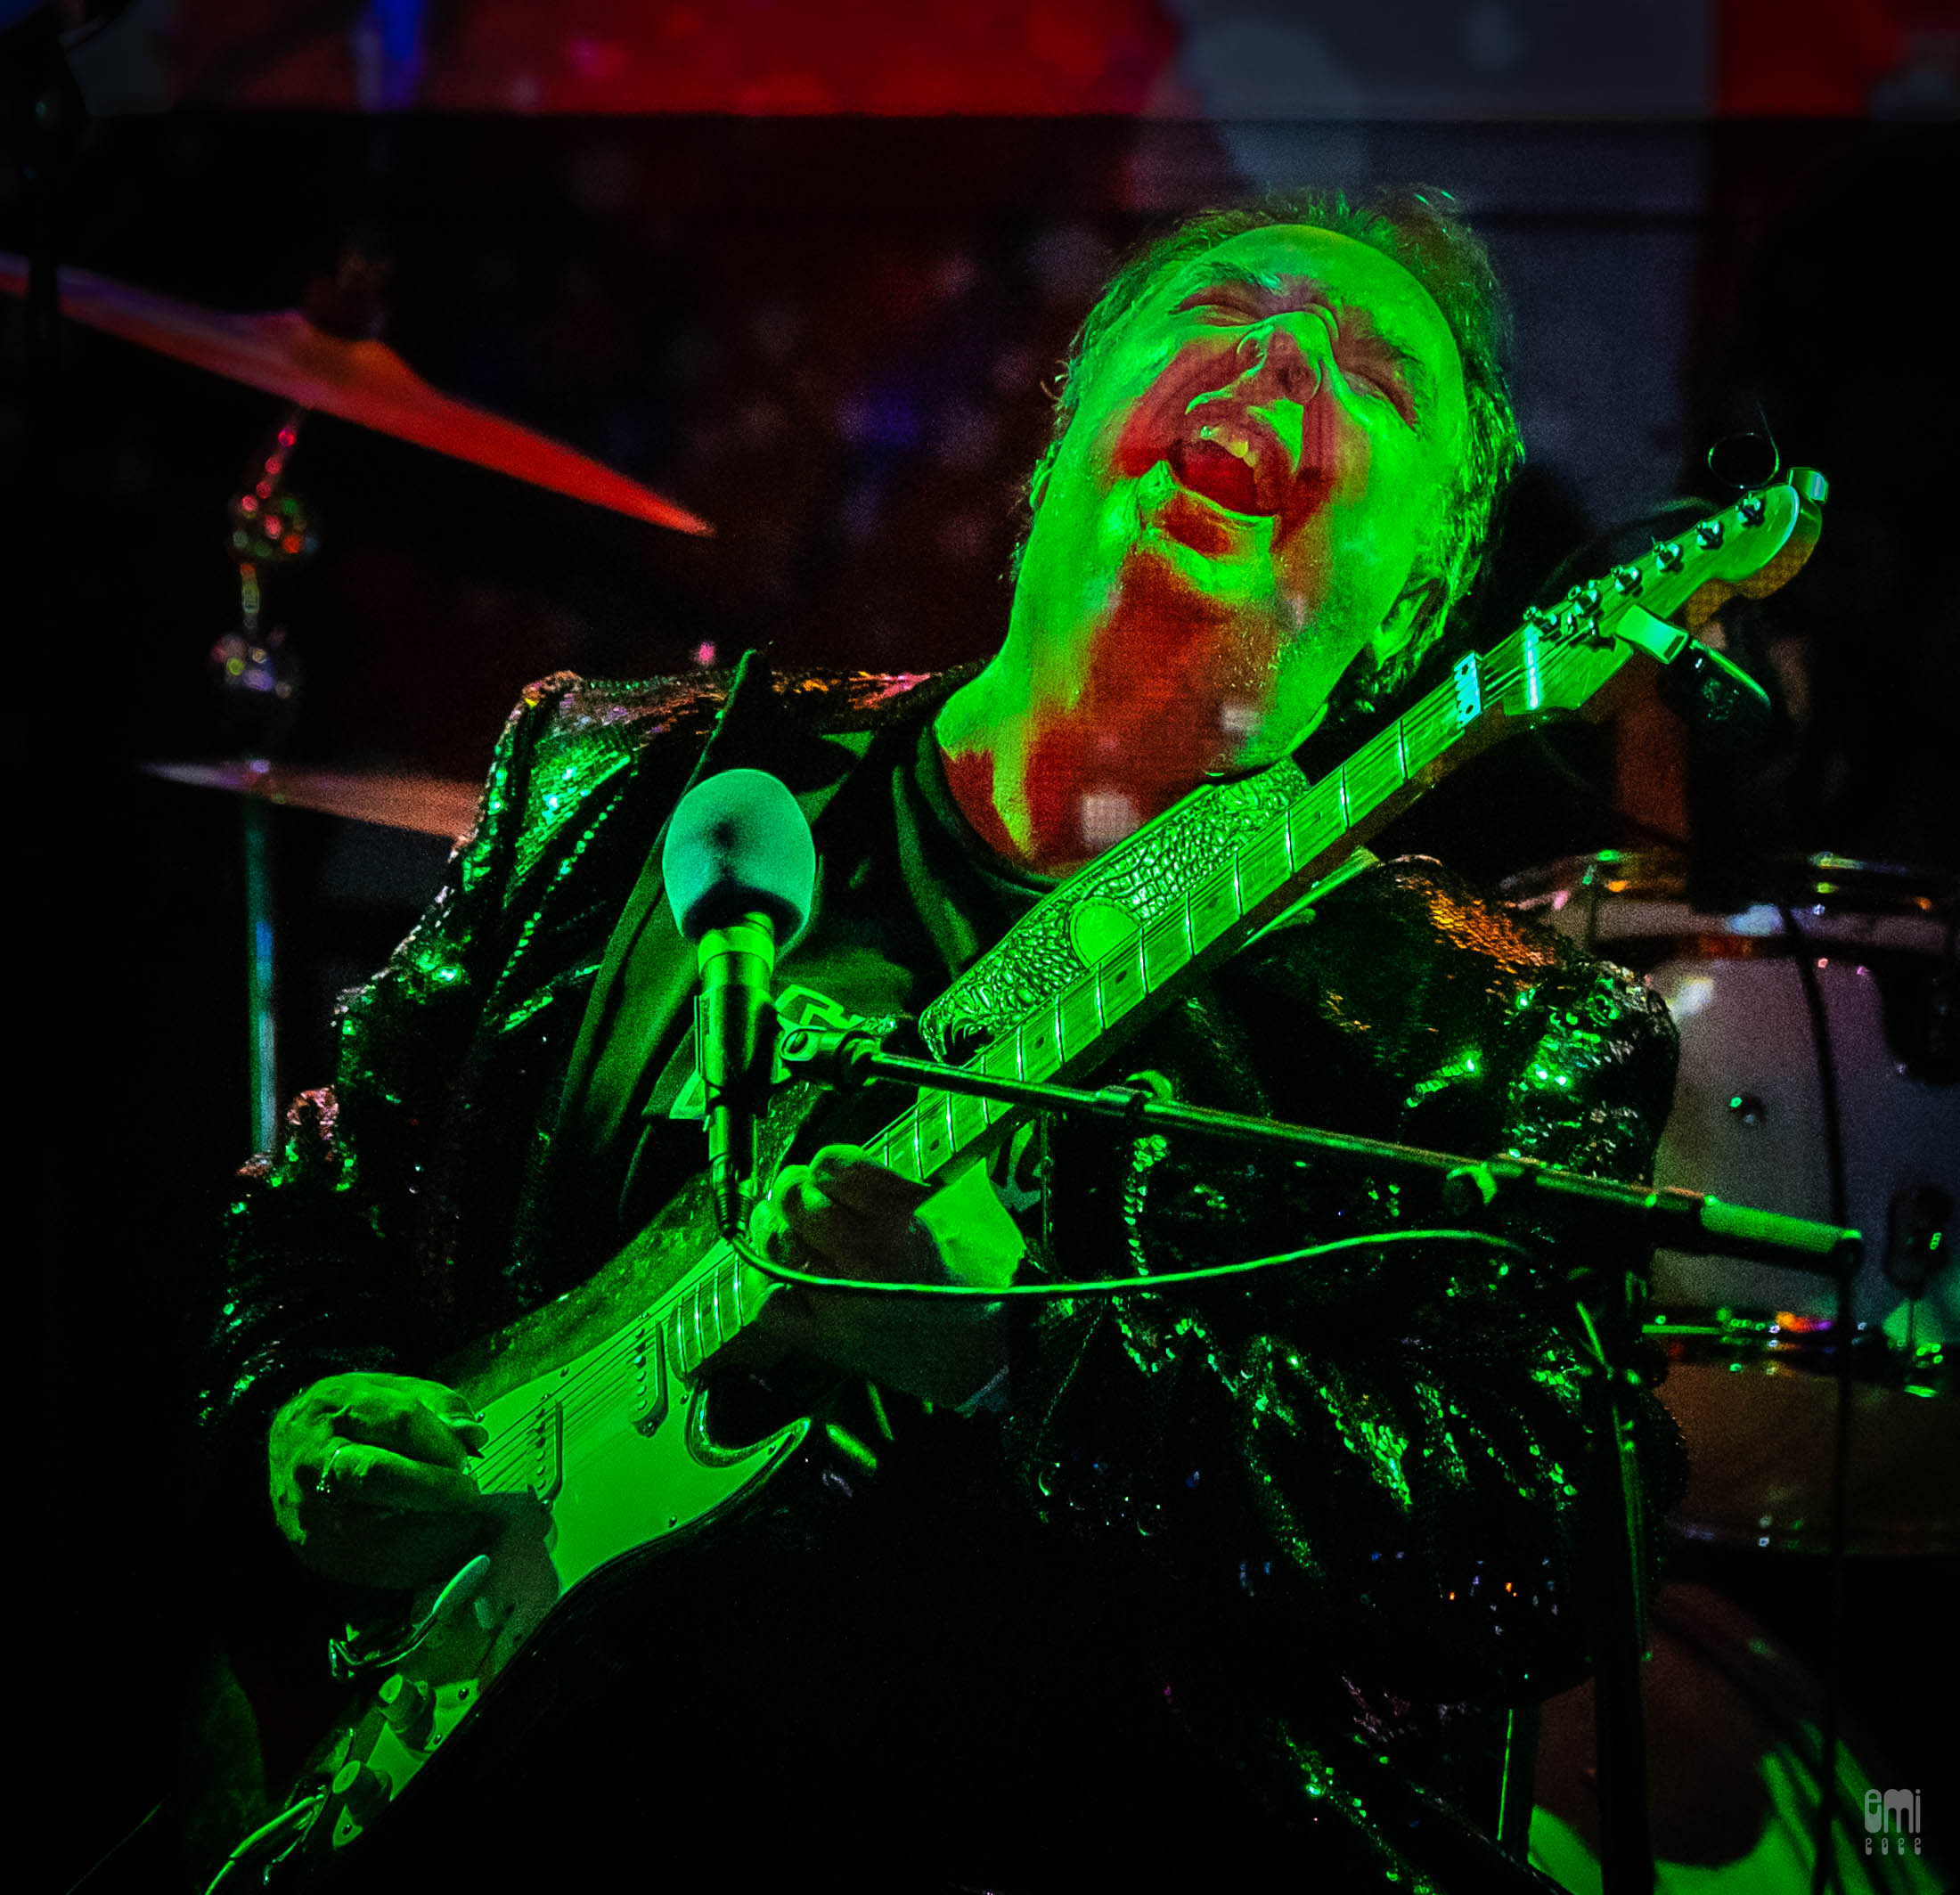 20221116 Os Mutantes with Mad Alchemy Liquid Light Show at The Chapel SF. photo by emi